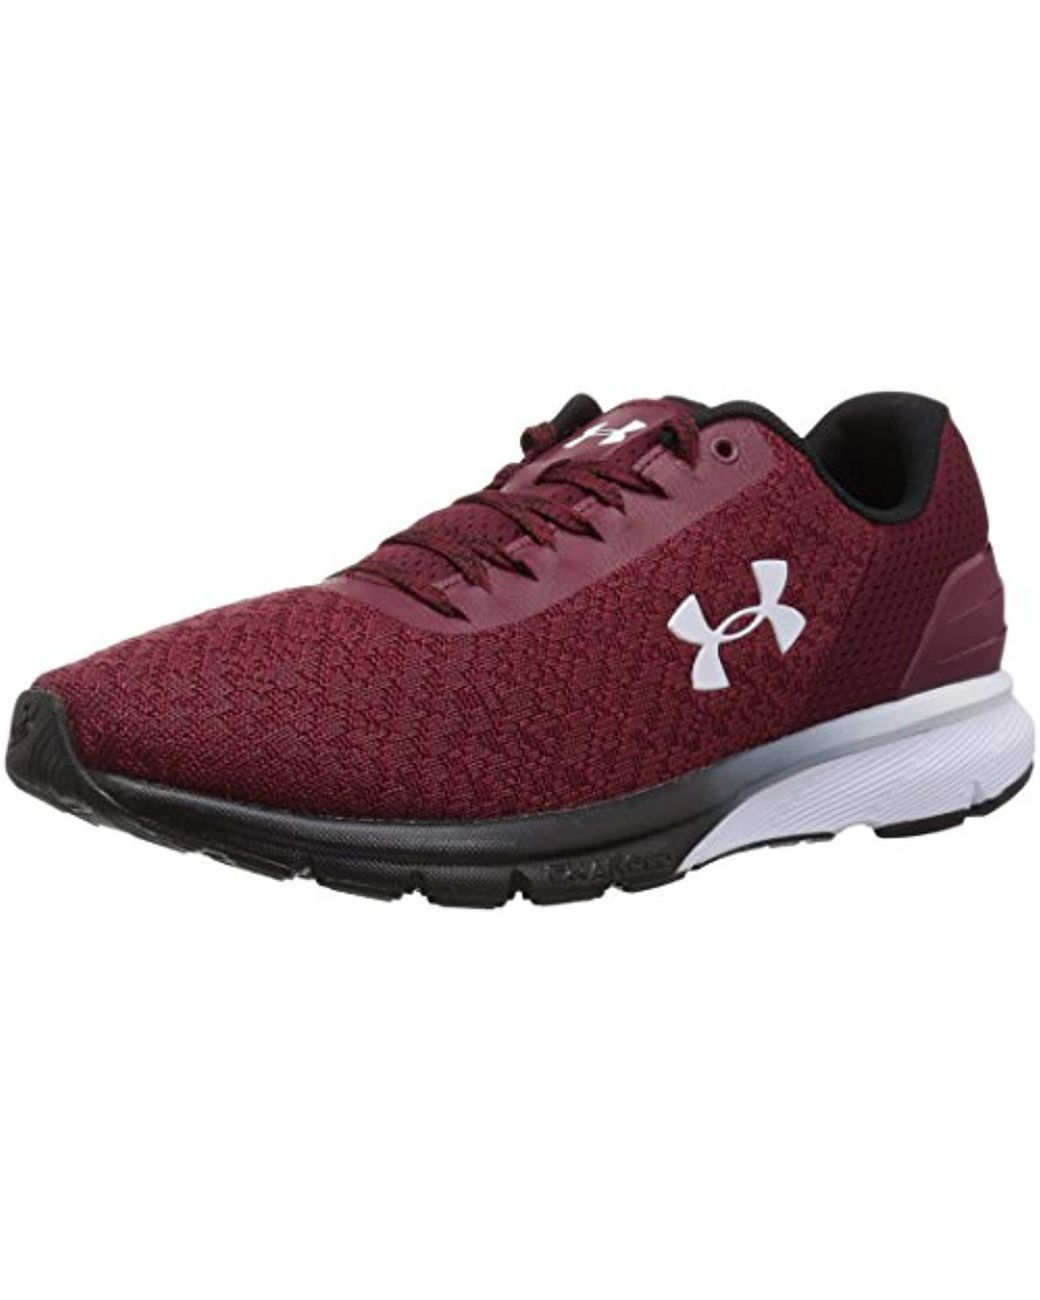 Lyst - Under Armour Charged Escape 2 Running Shoe in Red for Men